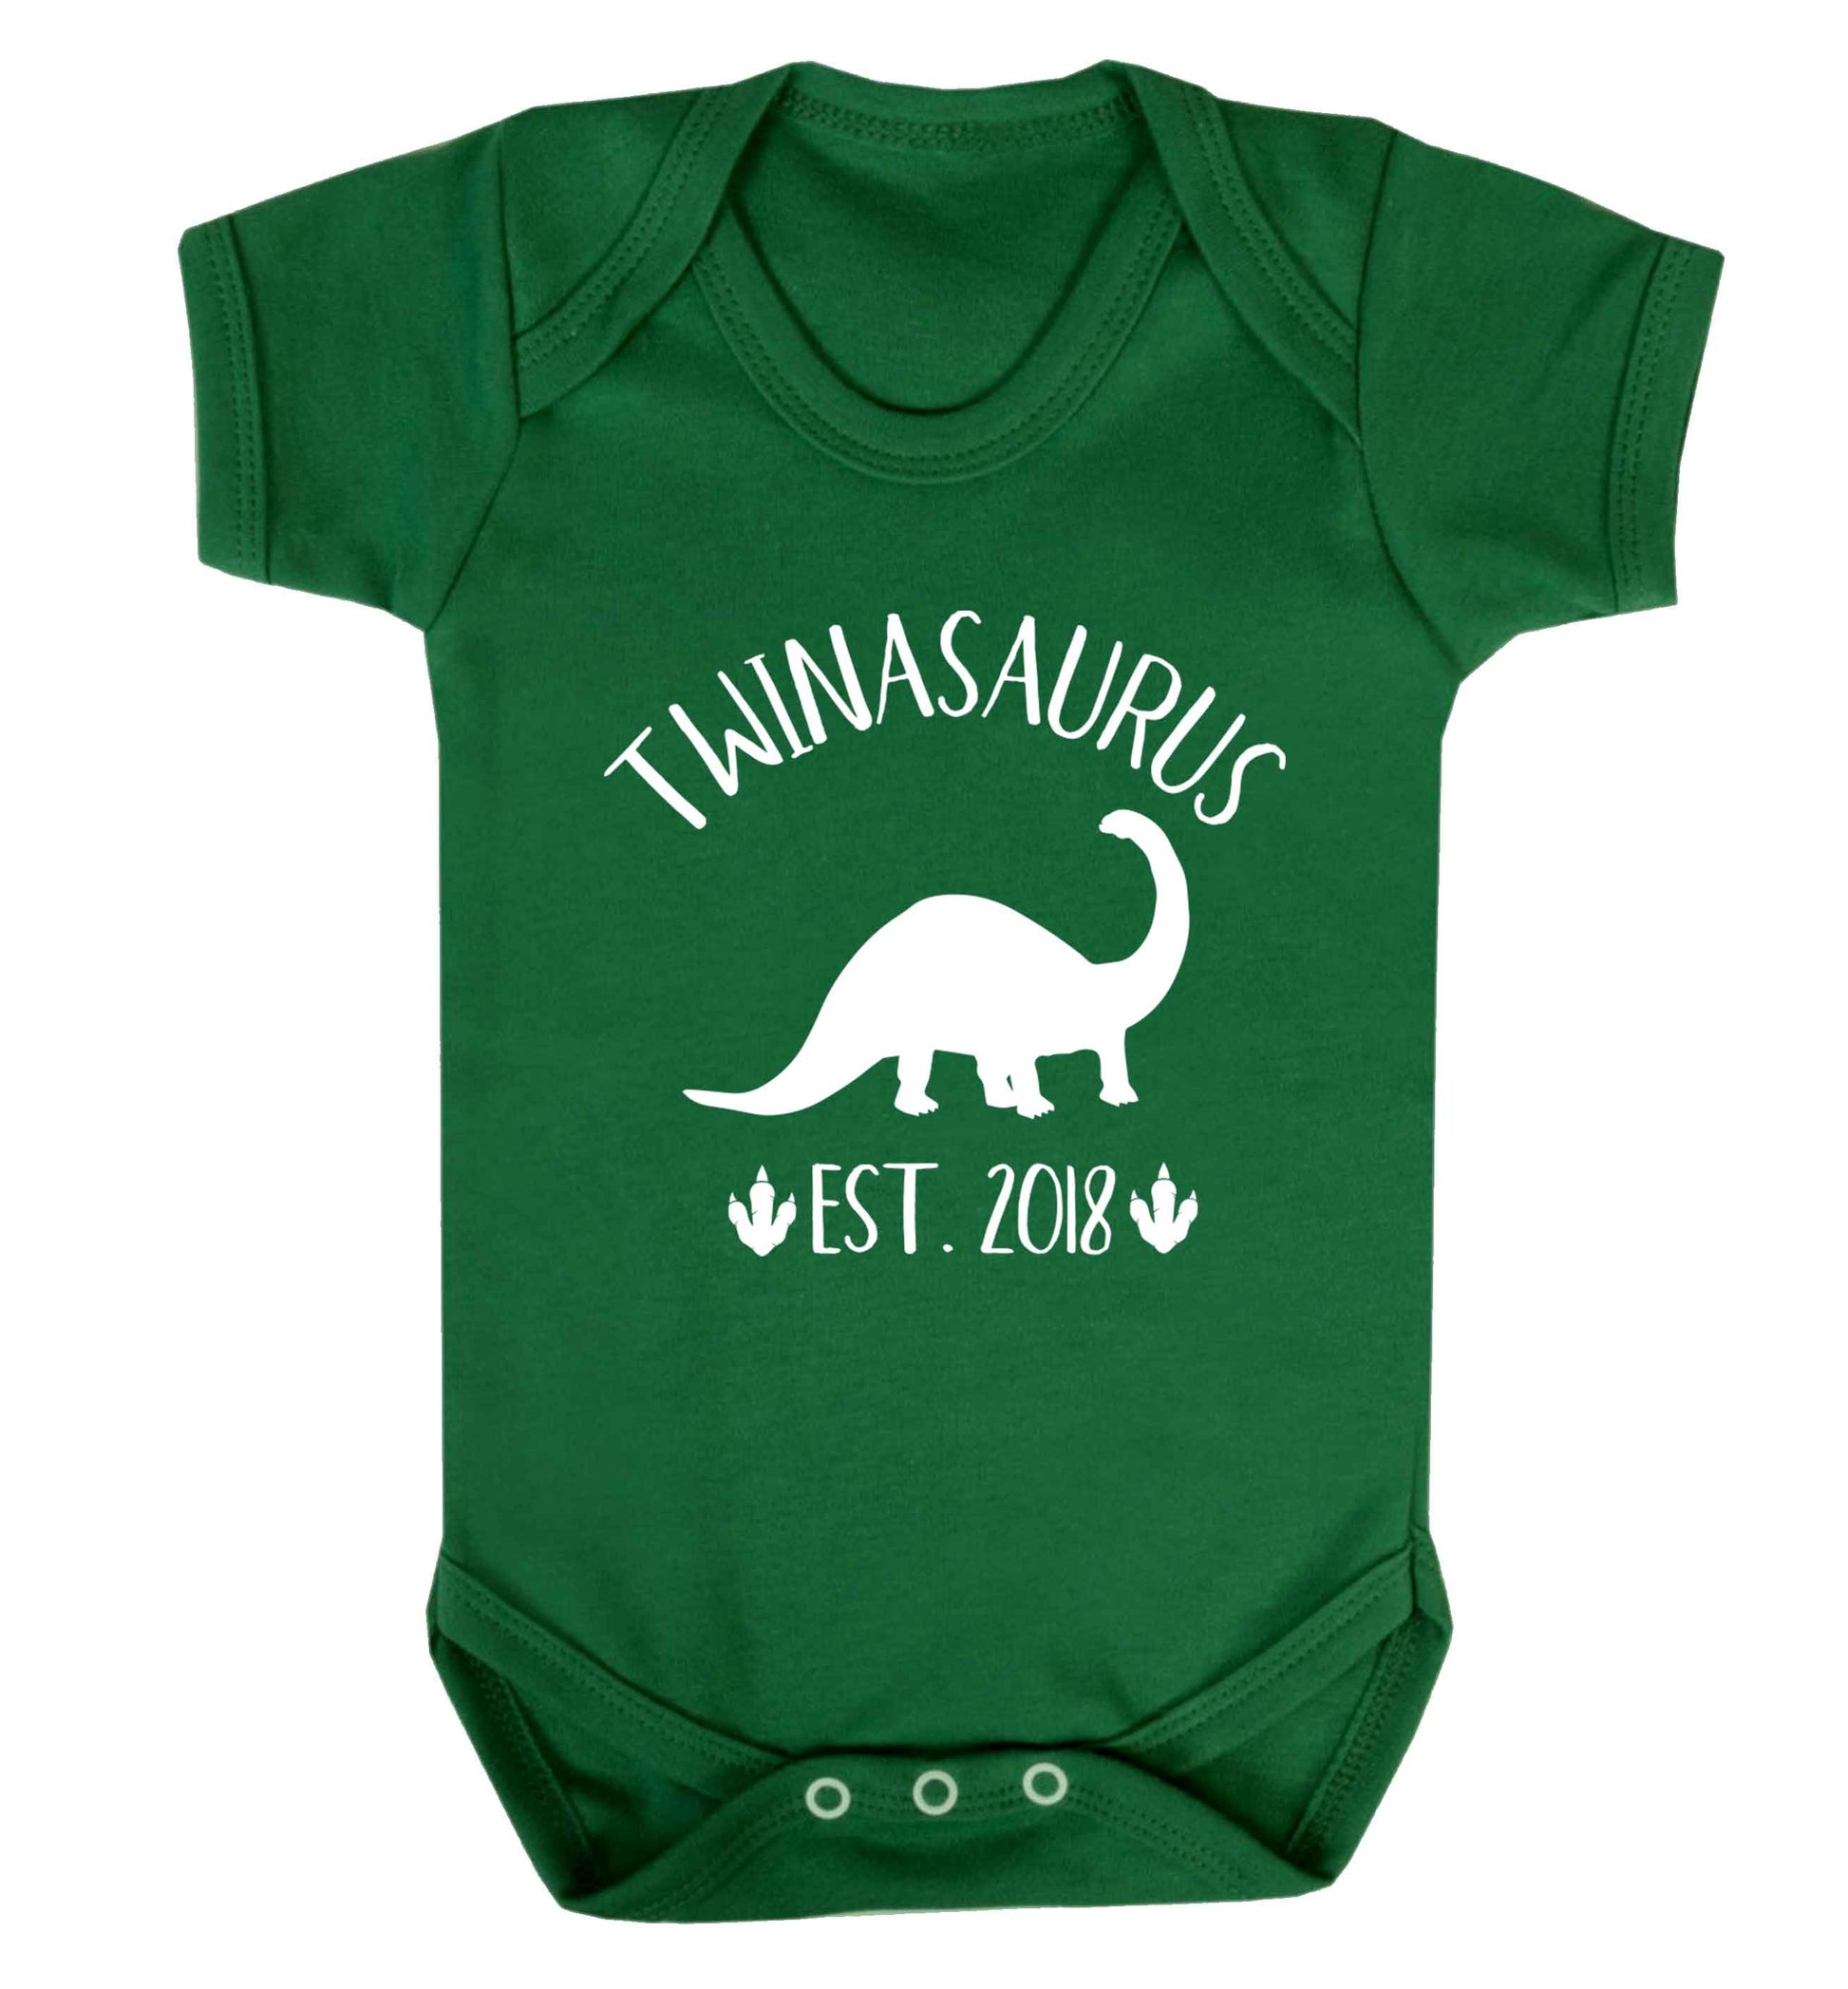 Personalised twinasaurus since (custom date) Baby Vest green 18-24 months